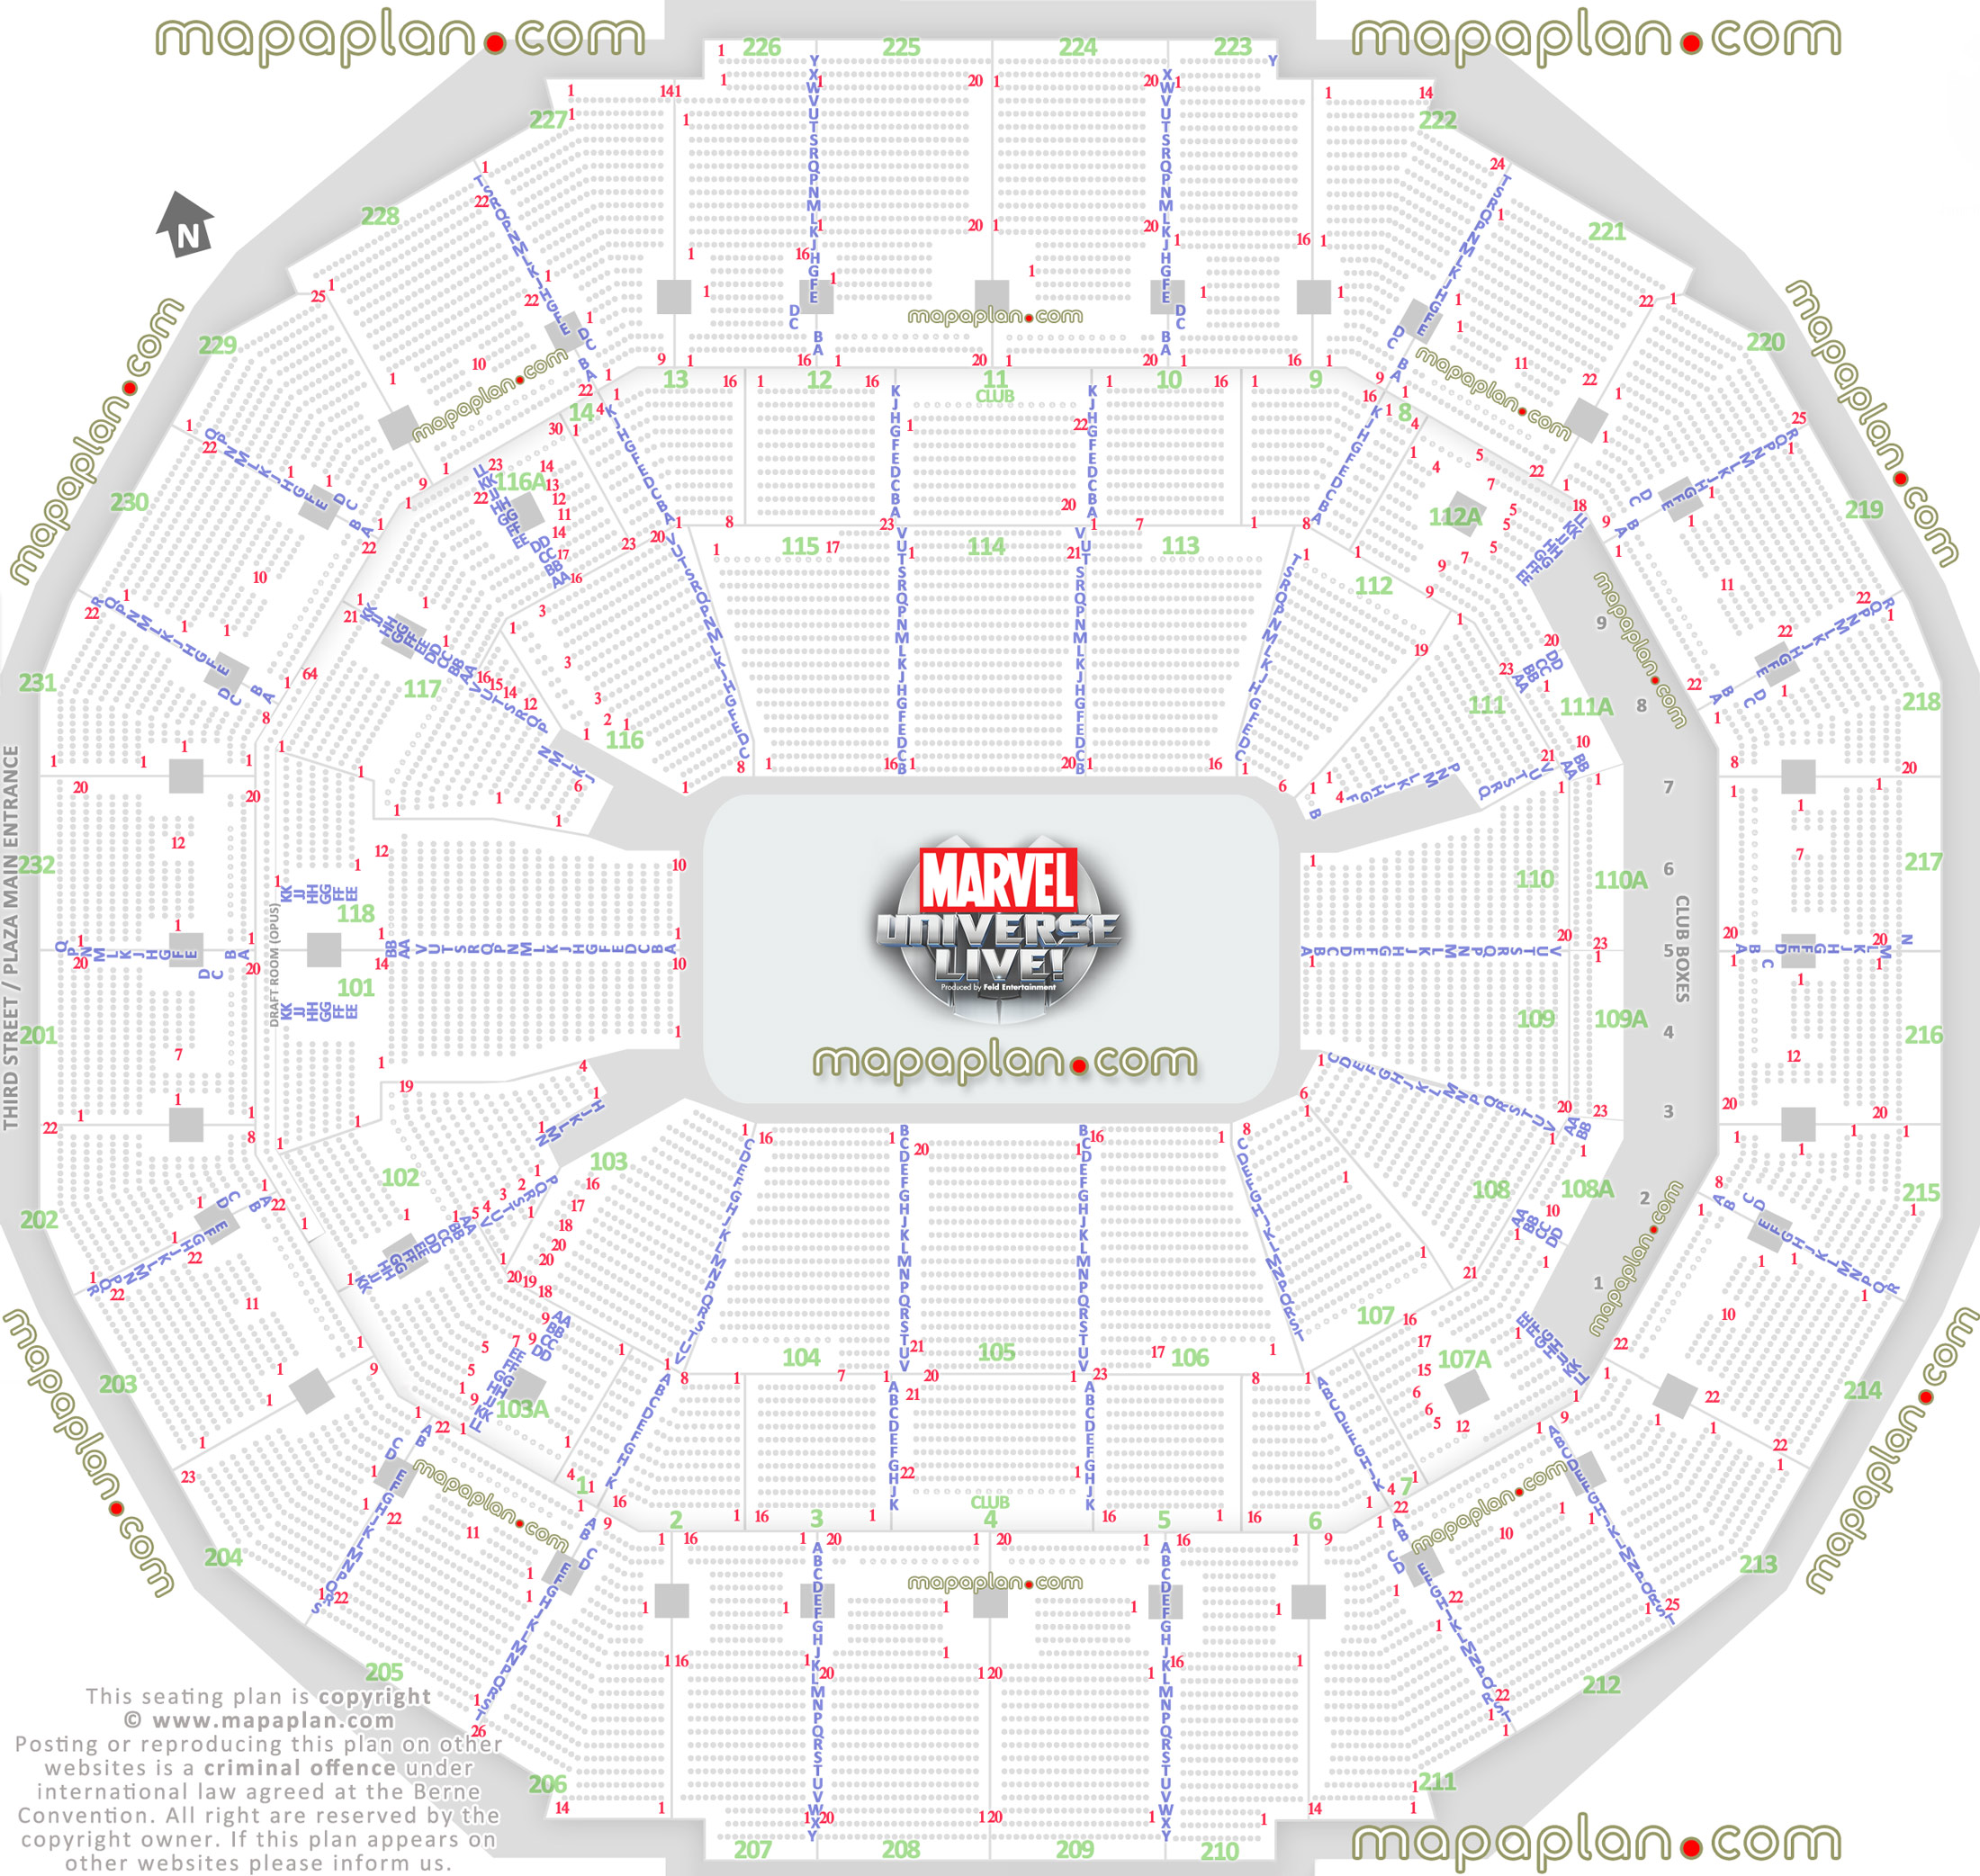 marvel universe seating map printable visual layout diagram full exact row numbers plan seats row plaza club terrace level sections row a b c d e f g h j k l m n p q r s t u v w x y aa bb cc dd ee ff gg hh jj kk ll Memphis FedExForum seating chart